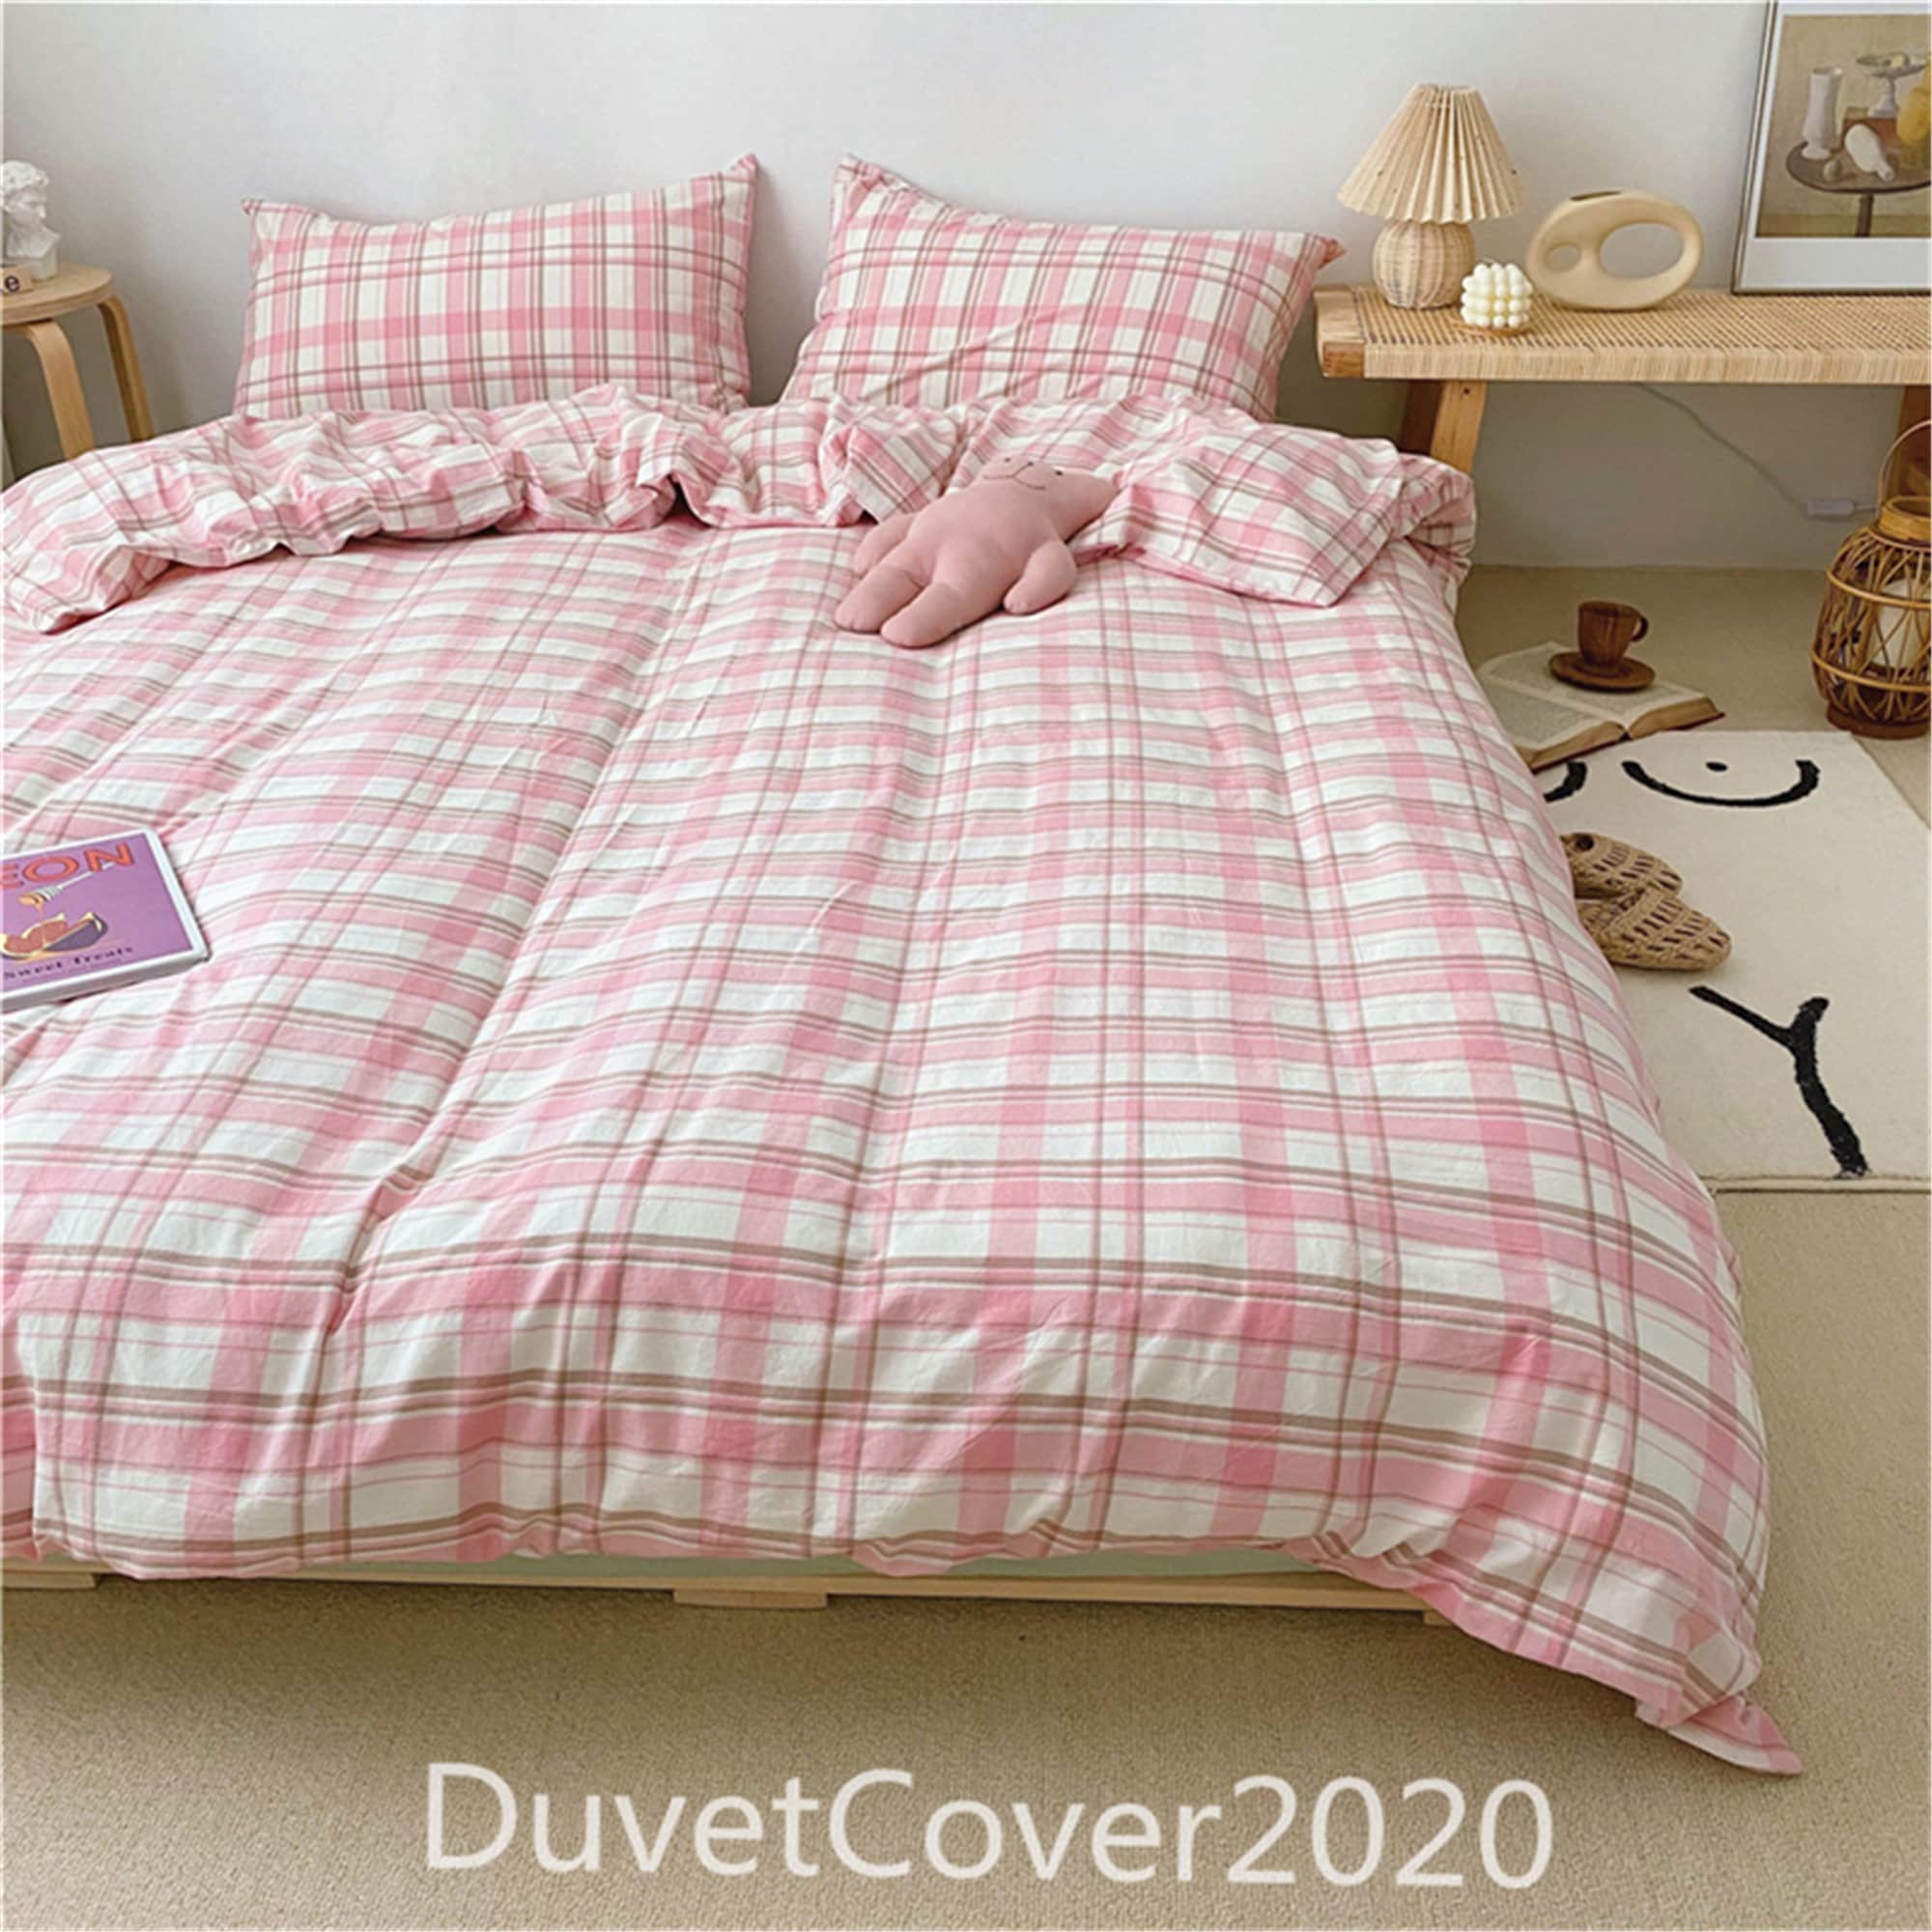 New Cotton Duvet Cover Set Quilted Bedding Set With Pillow Cases & Fitted Sheet 